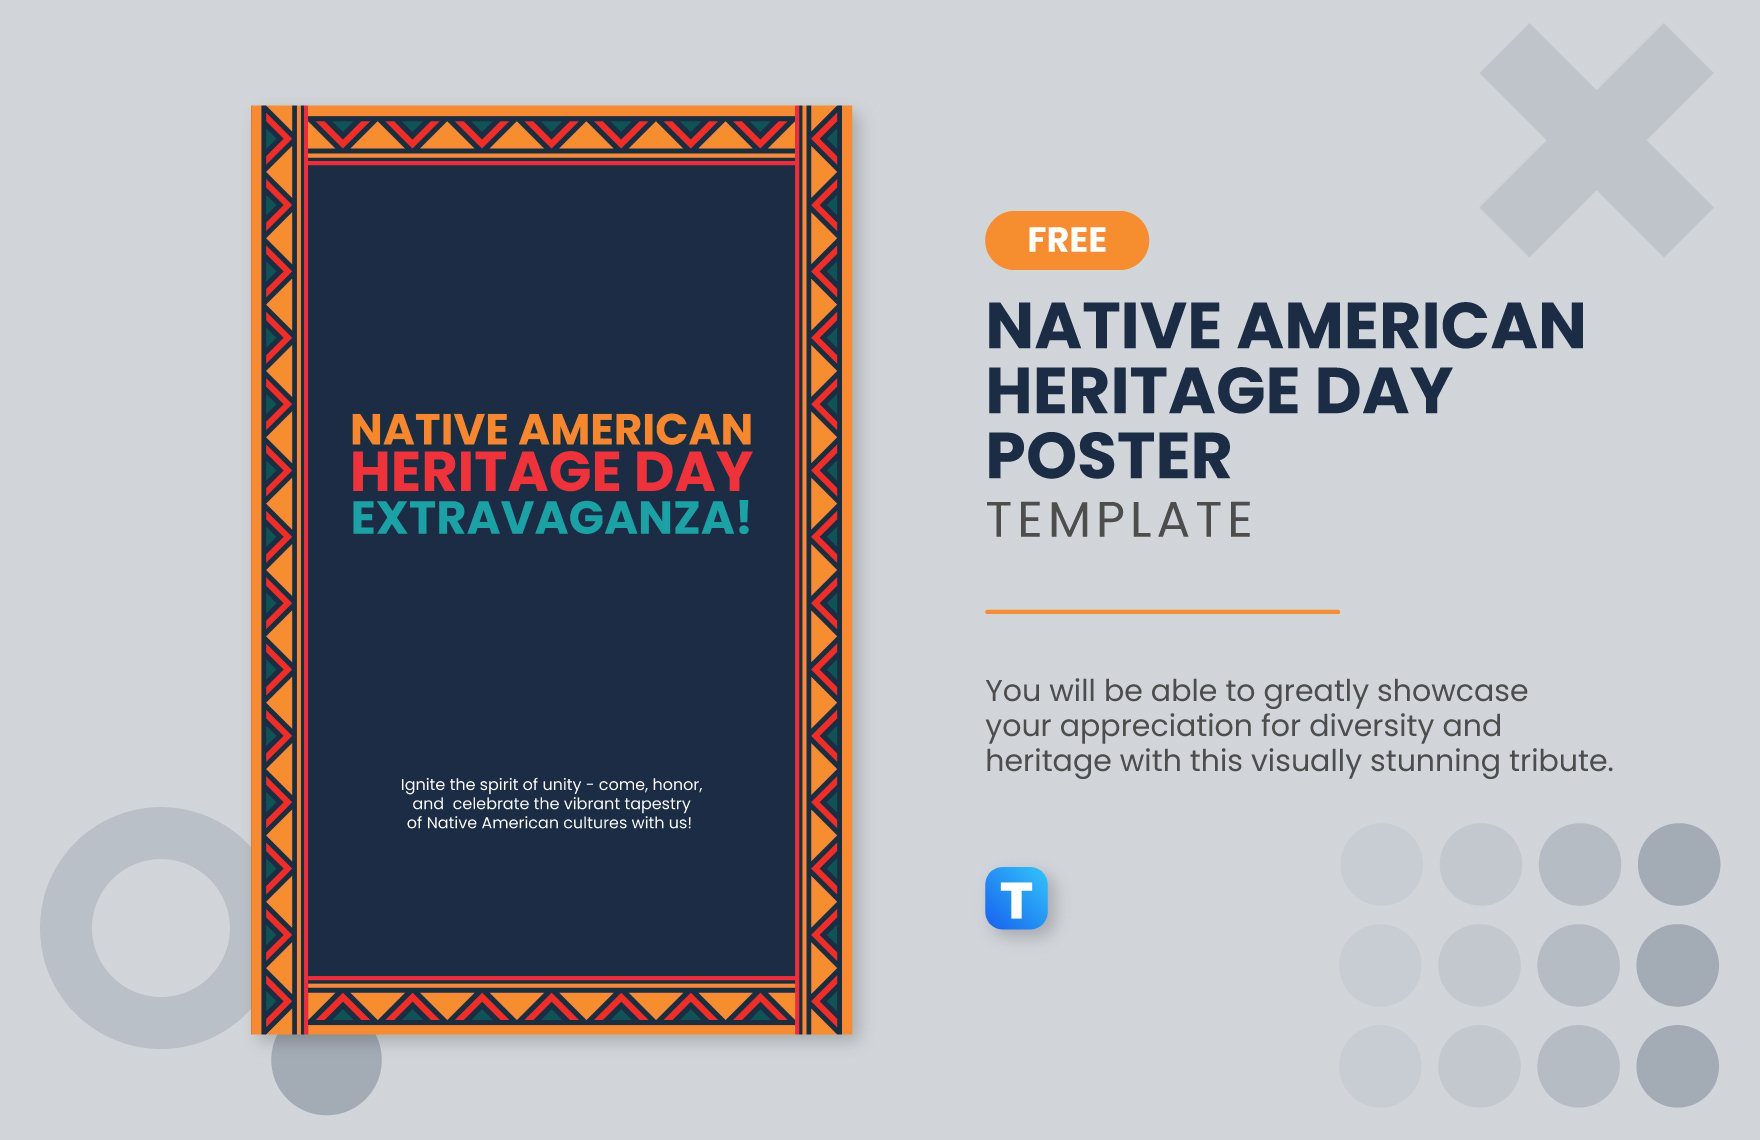 Native American Heritage Day Poster Template